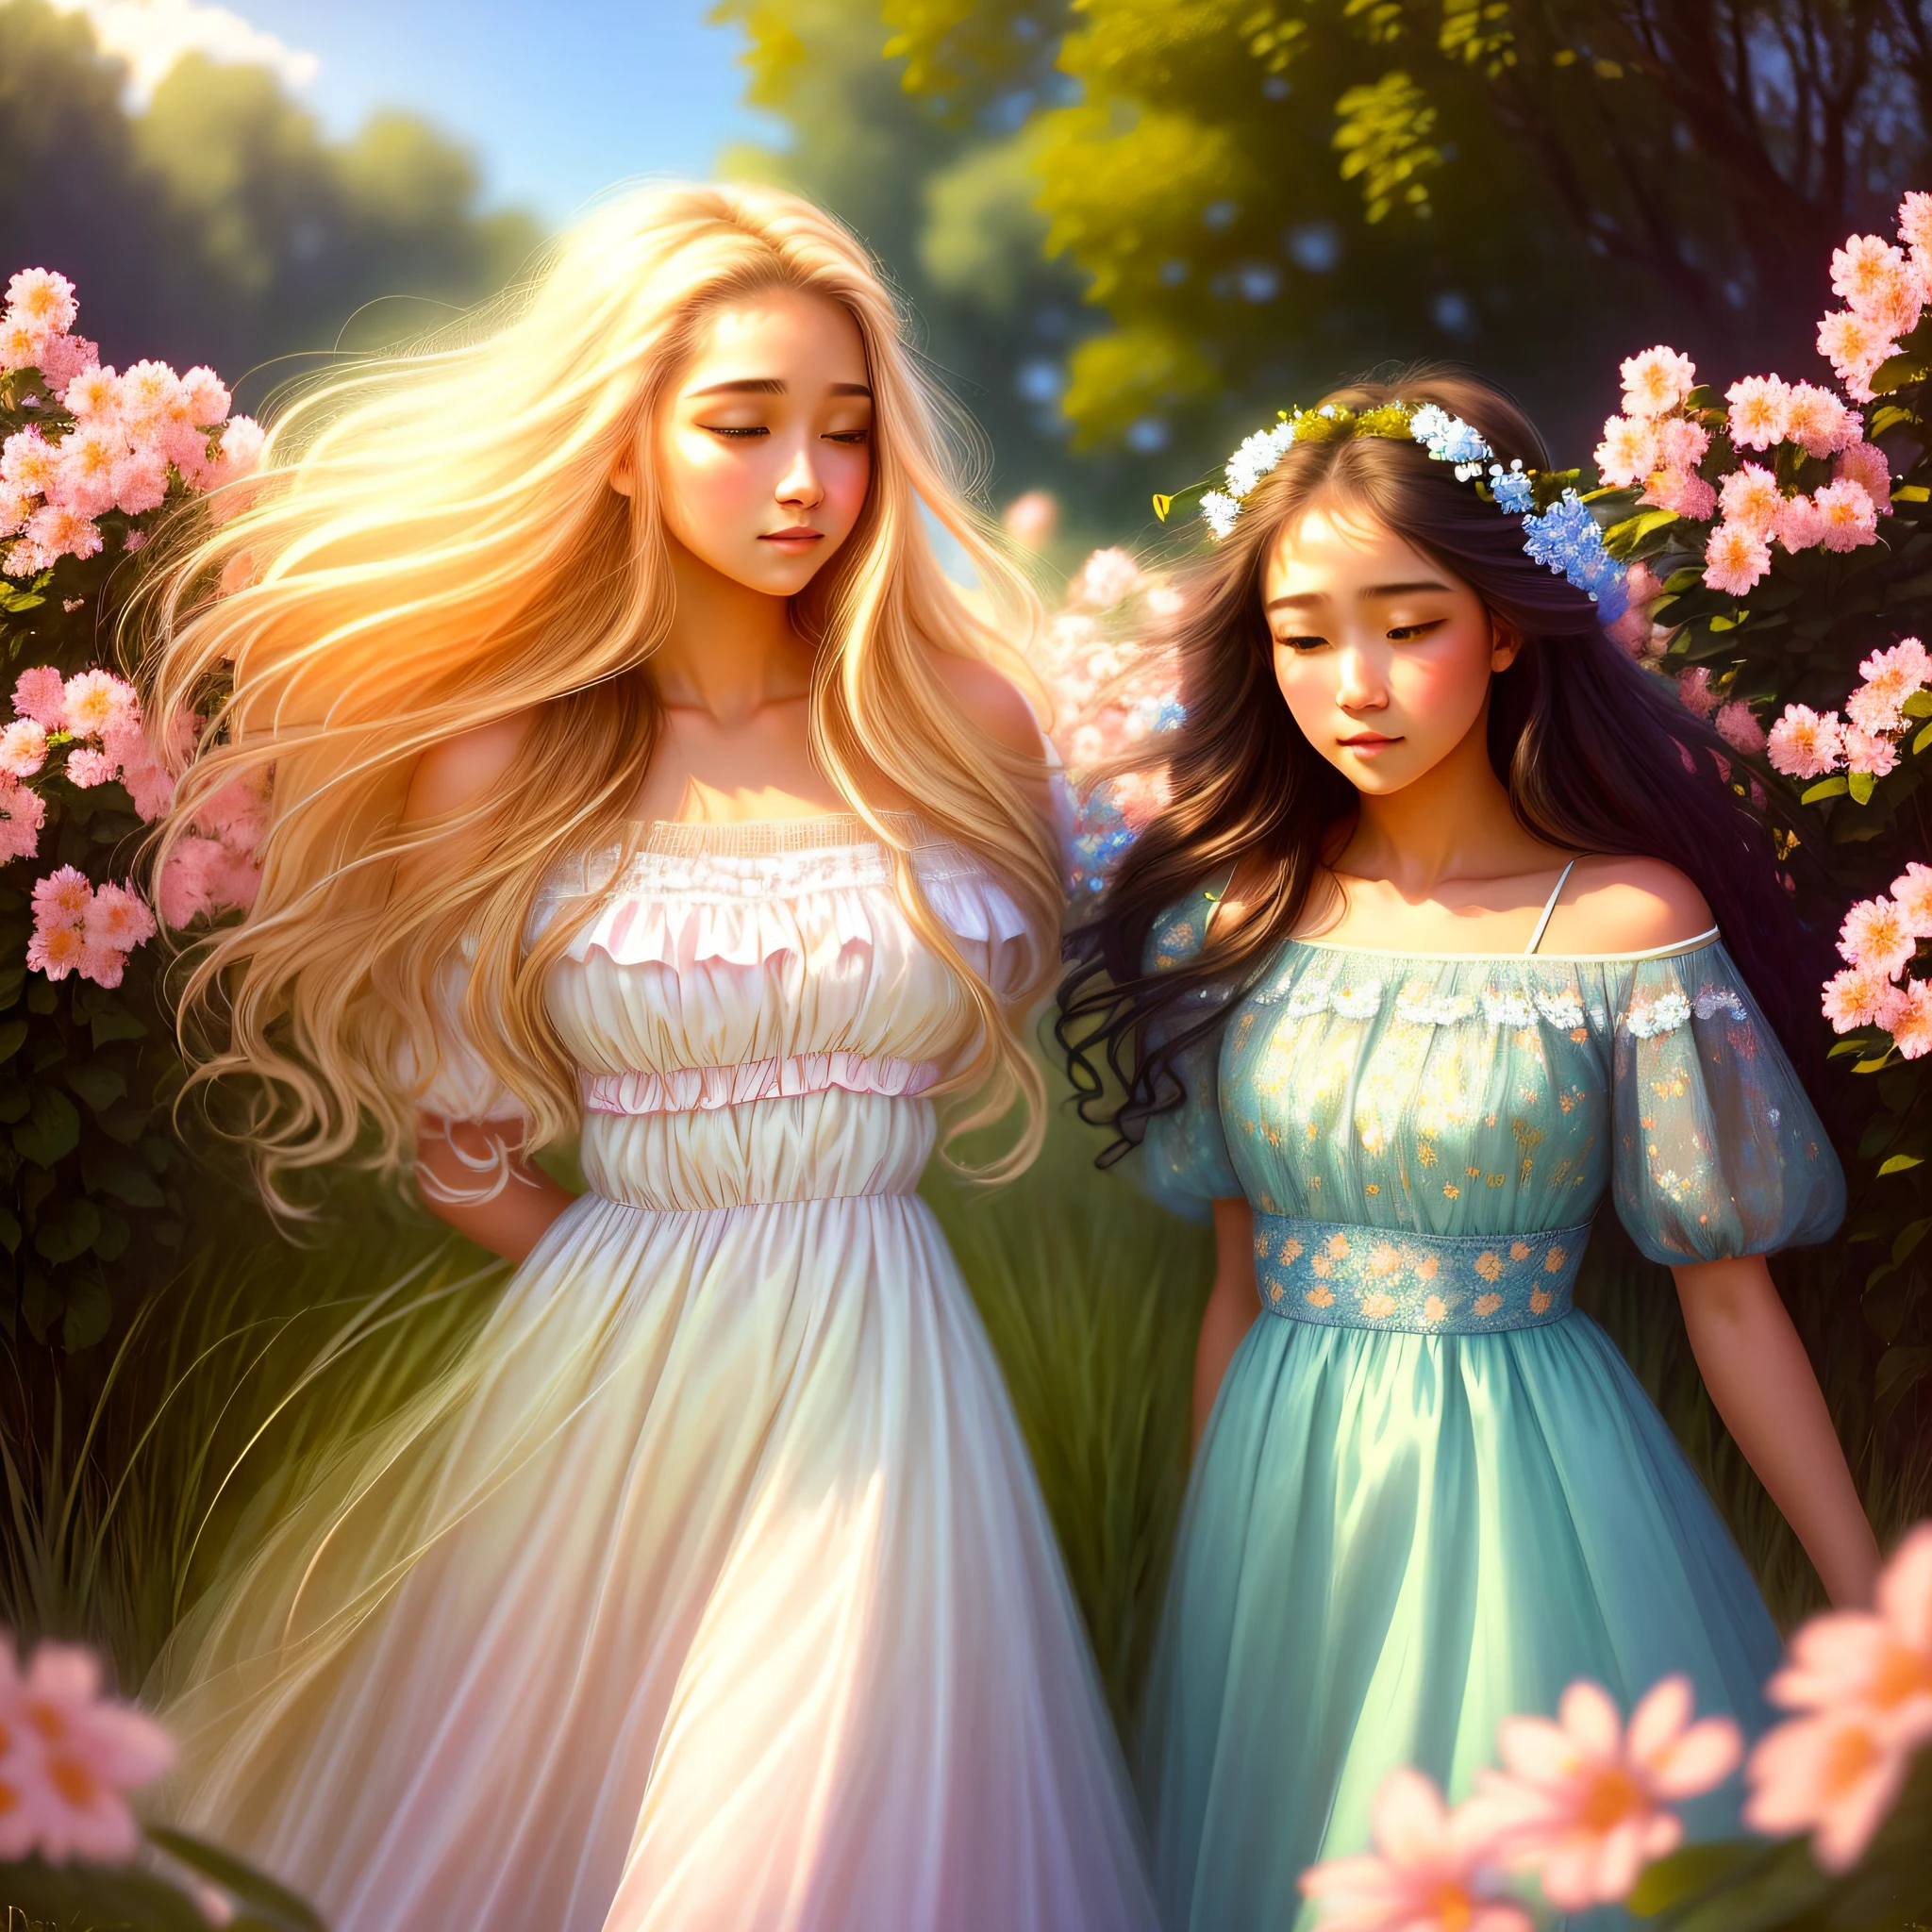 One image depicts a beautiful girl in a natural setting, surrounded by a field of colorful flowers. The luminosity is soft, with the golden sun's rays filtering through the trees, creating a soft glow on your face. The girl has long, loose hair, and her expressive eyes convey calm and serenity. She is wearing an elegant dress, with soft colors and delicate floral patterns. The image has a realistic style with an impressionistic touch, reminiscent of the paintings of artists such as Monet and Renoir. In the background, there is a gentle countryside, with green hills and a clear blue sky. The combination of soft colours, charming luminosity and delicate details conveys a sense of beauty and tranquility